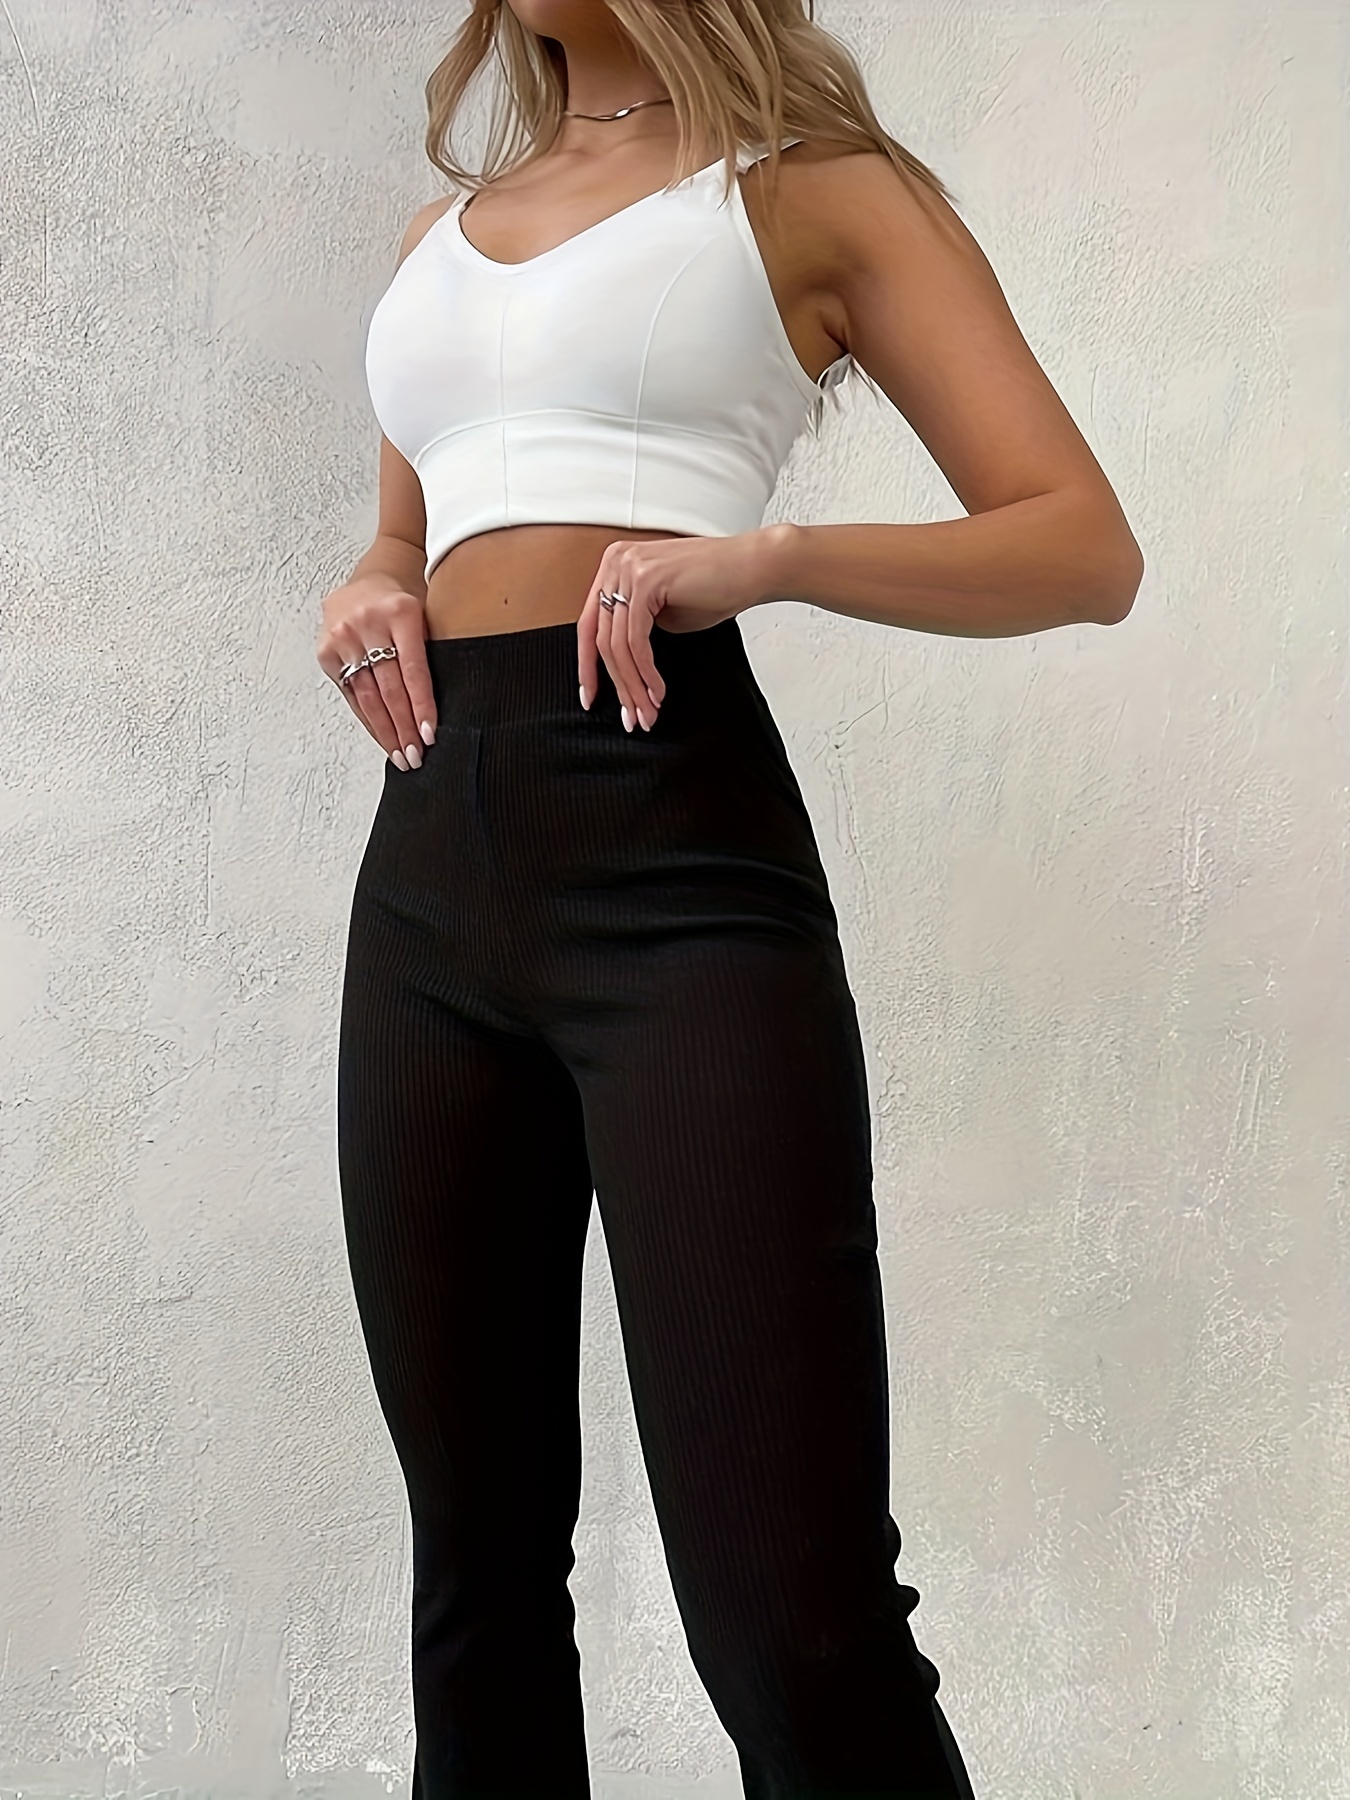 Casual Simple Slim Leggings Pants Solid High Waisted Fashion